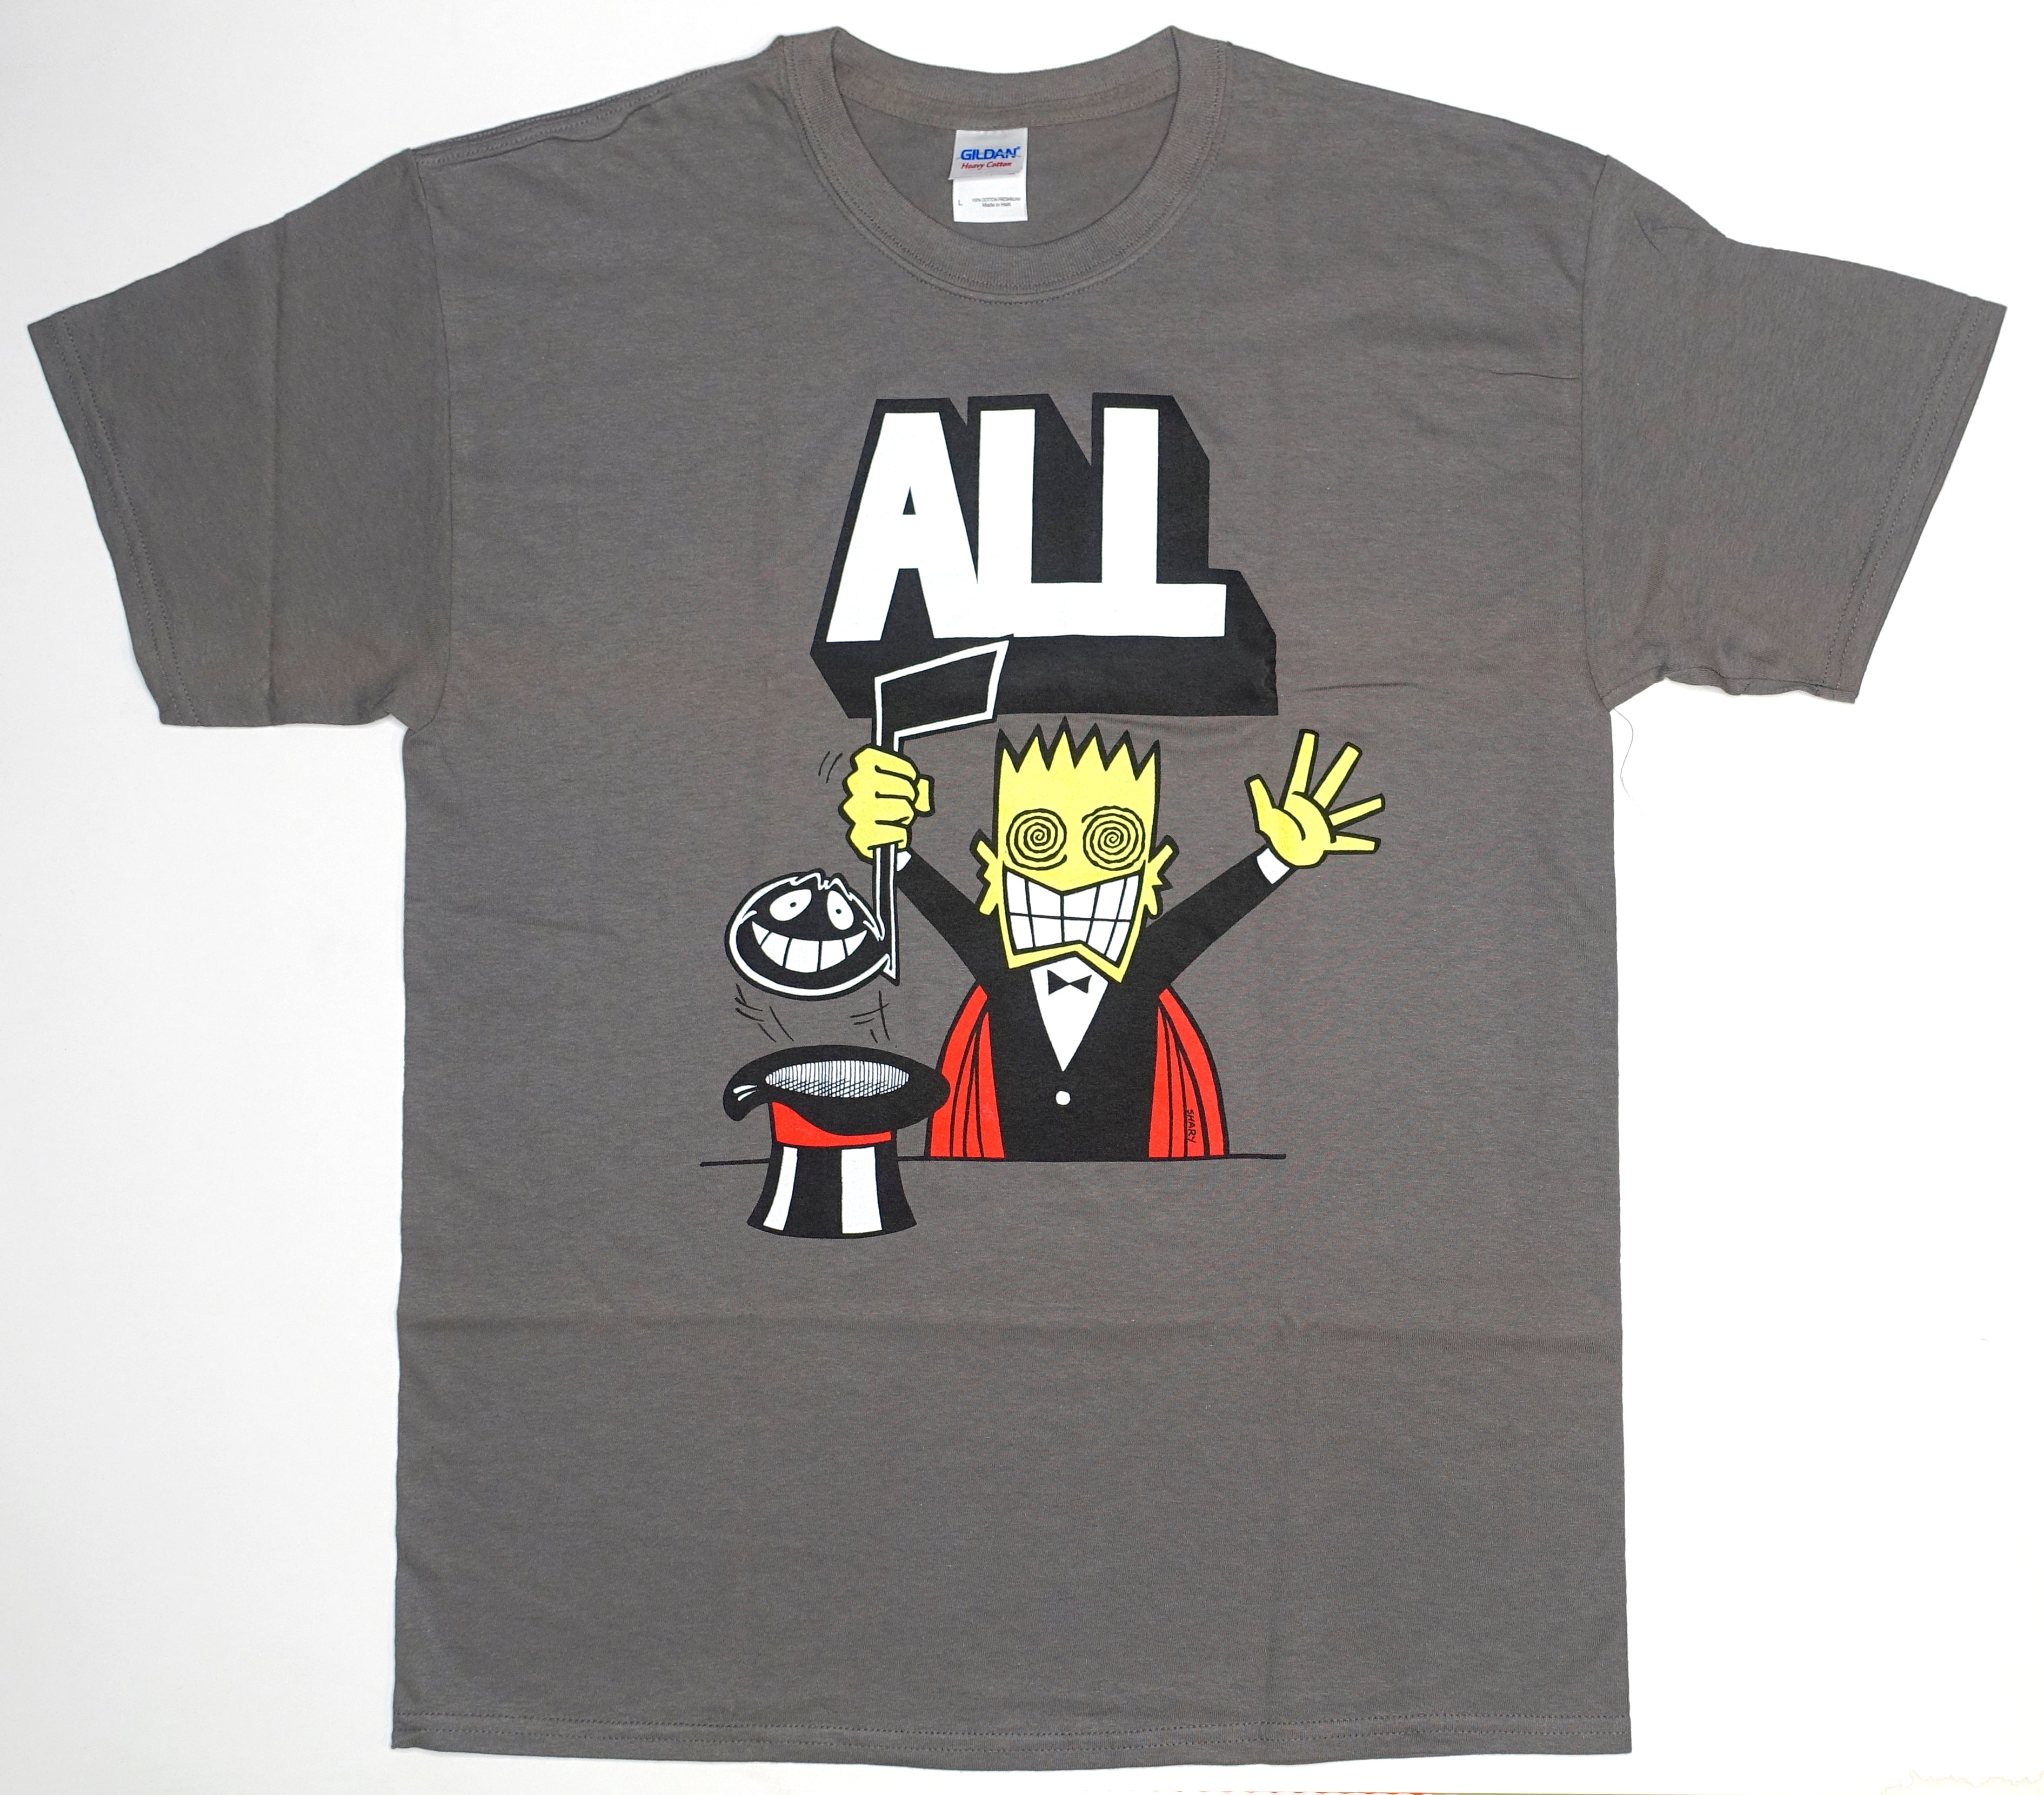 ALL - Allroy the Great Tour Shirt Size Large